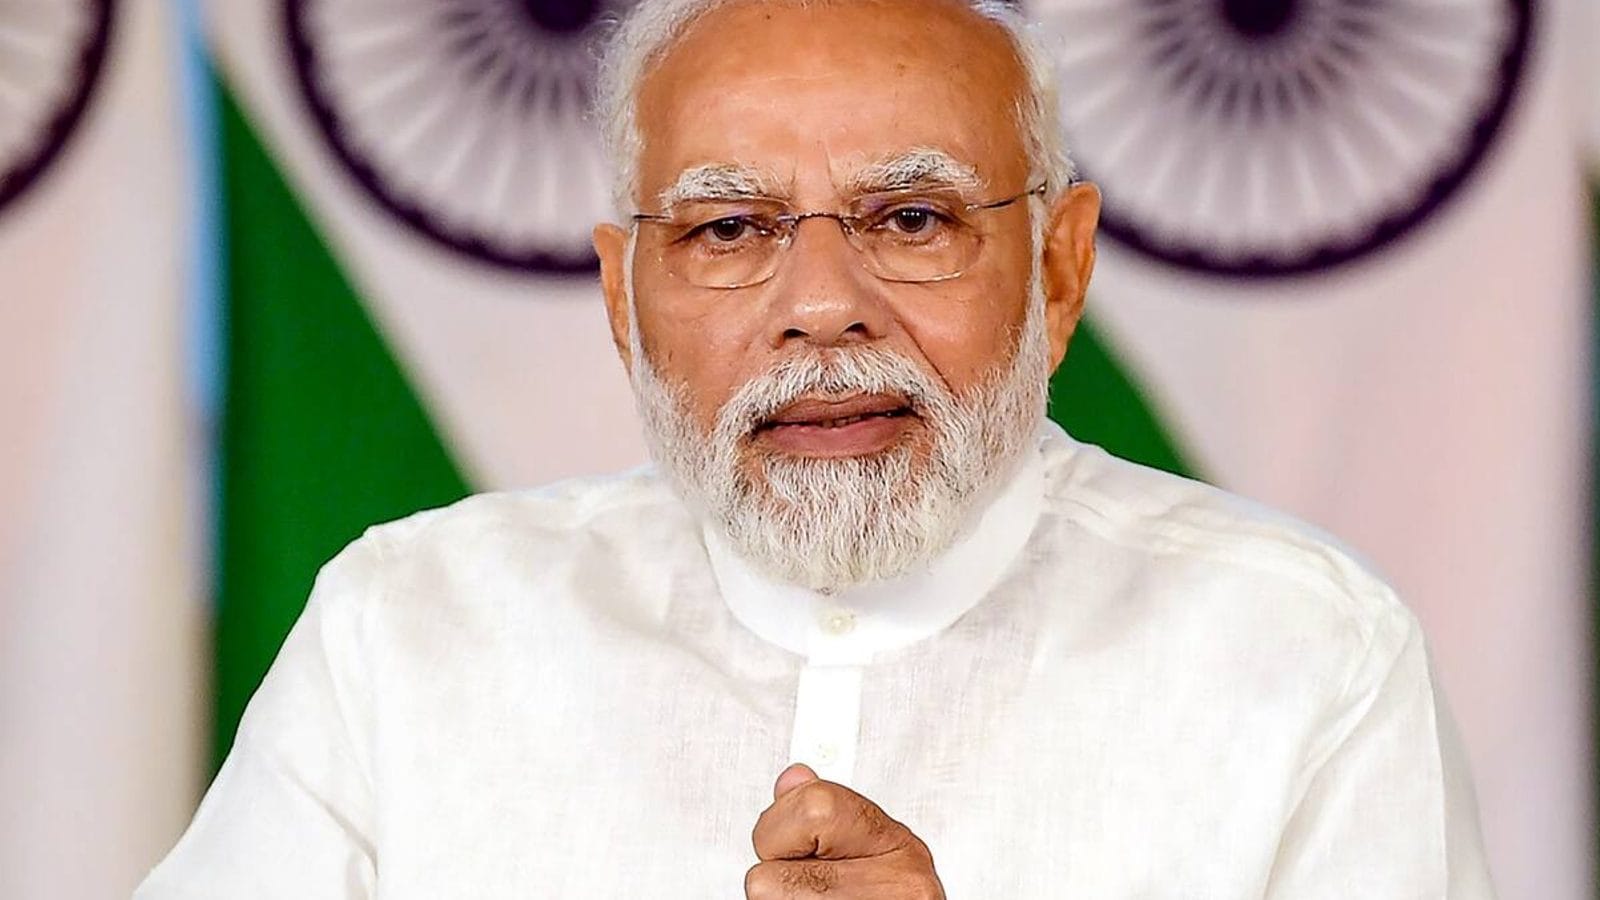 PM Modi tears into Cong during August 5 black clothes protest